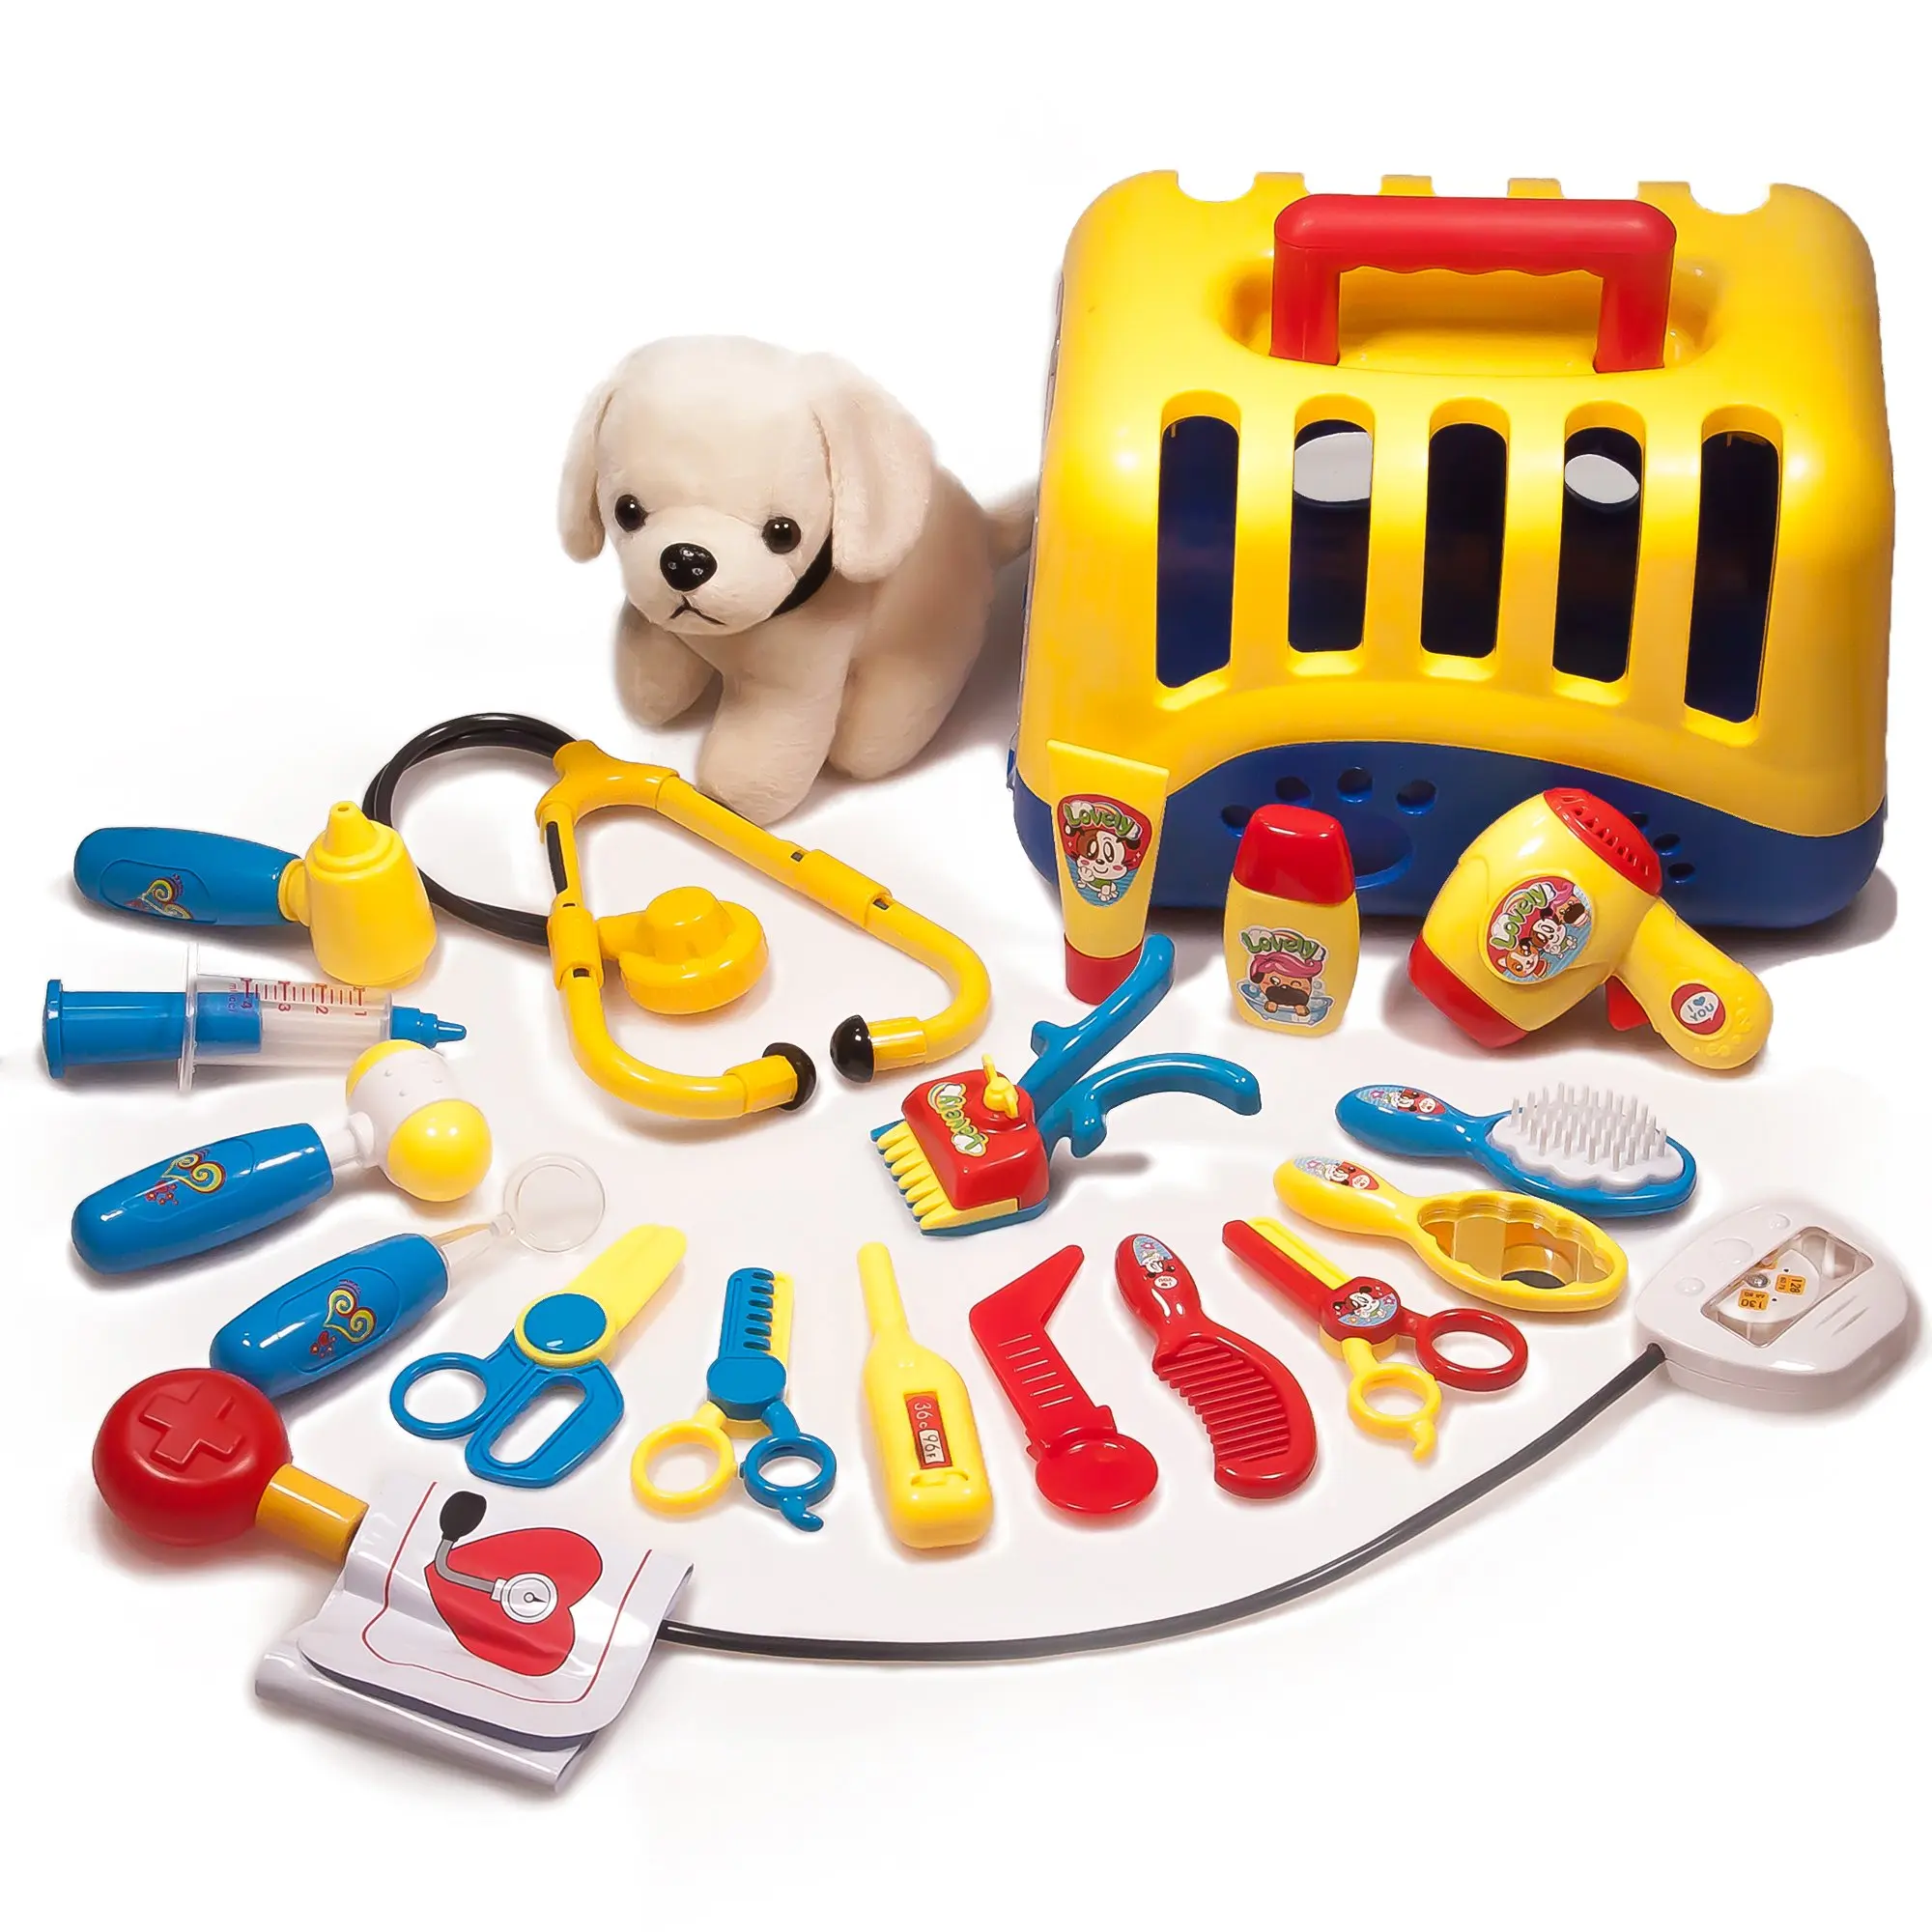 dog grooming toy set